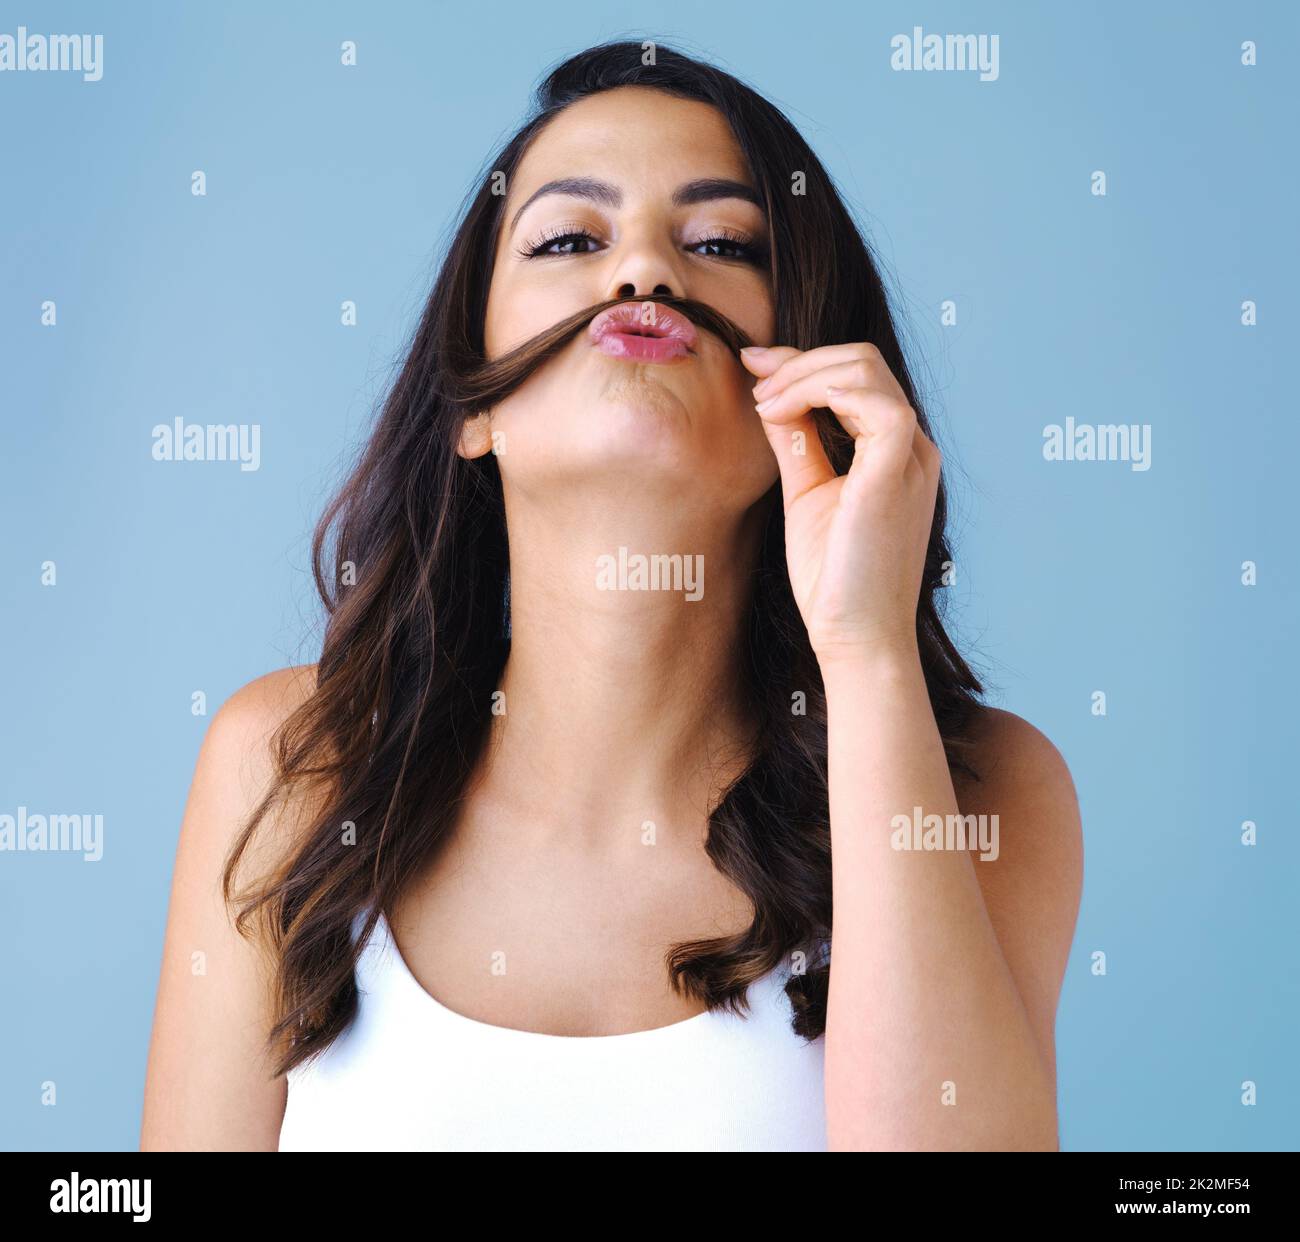 Its all part of her charm. Studio shot of an attractive young woman playfully making a mustache with her hair against a blue background. Stock Photo